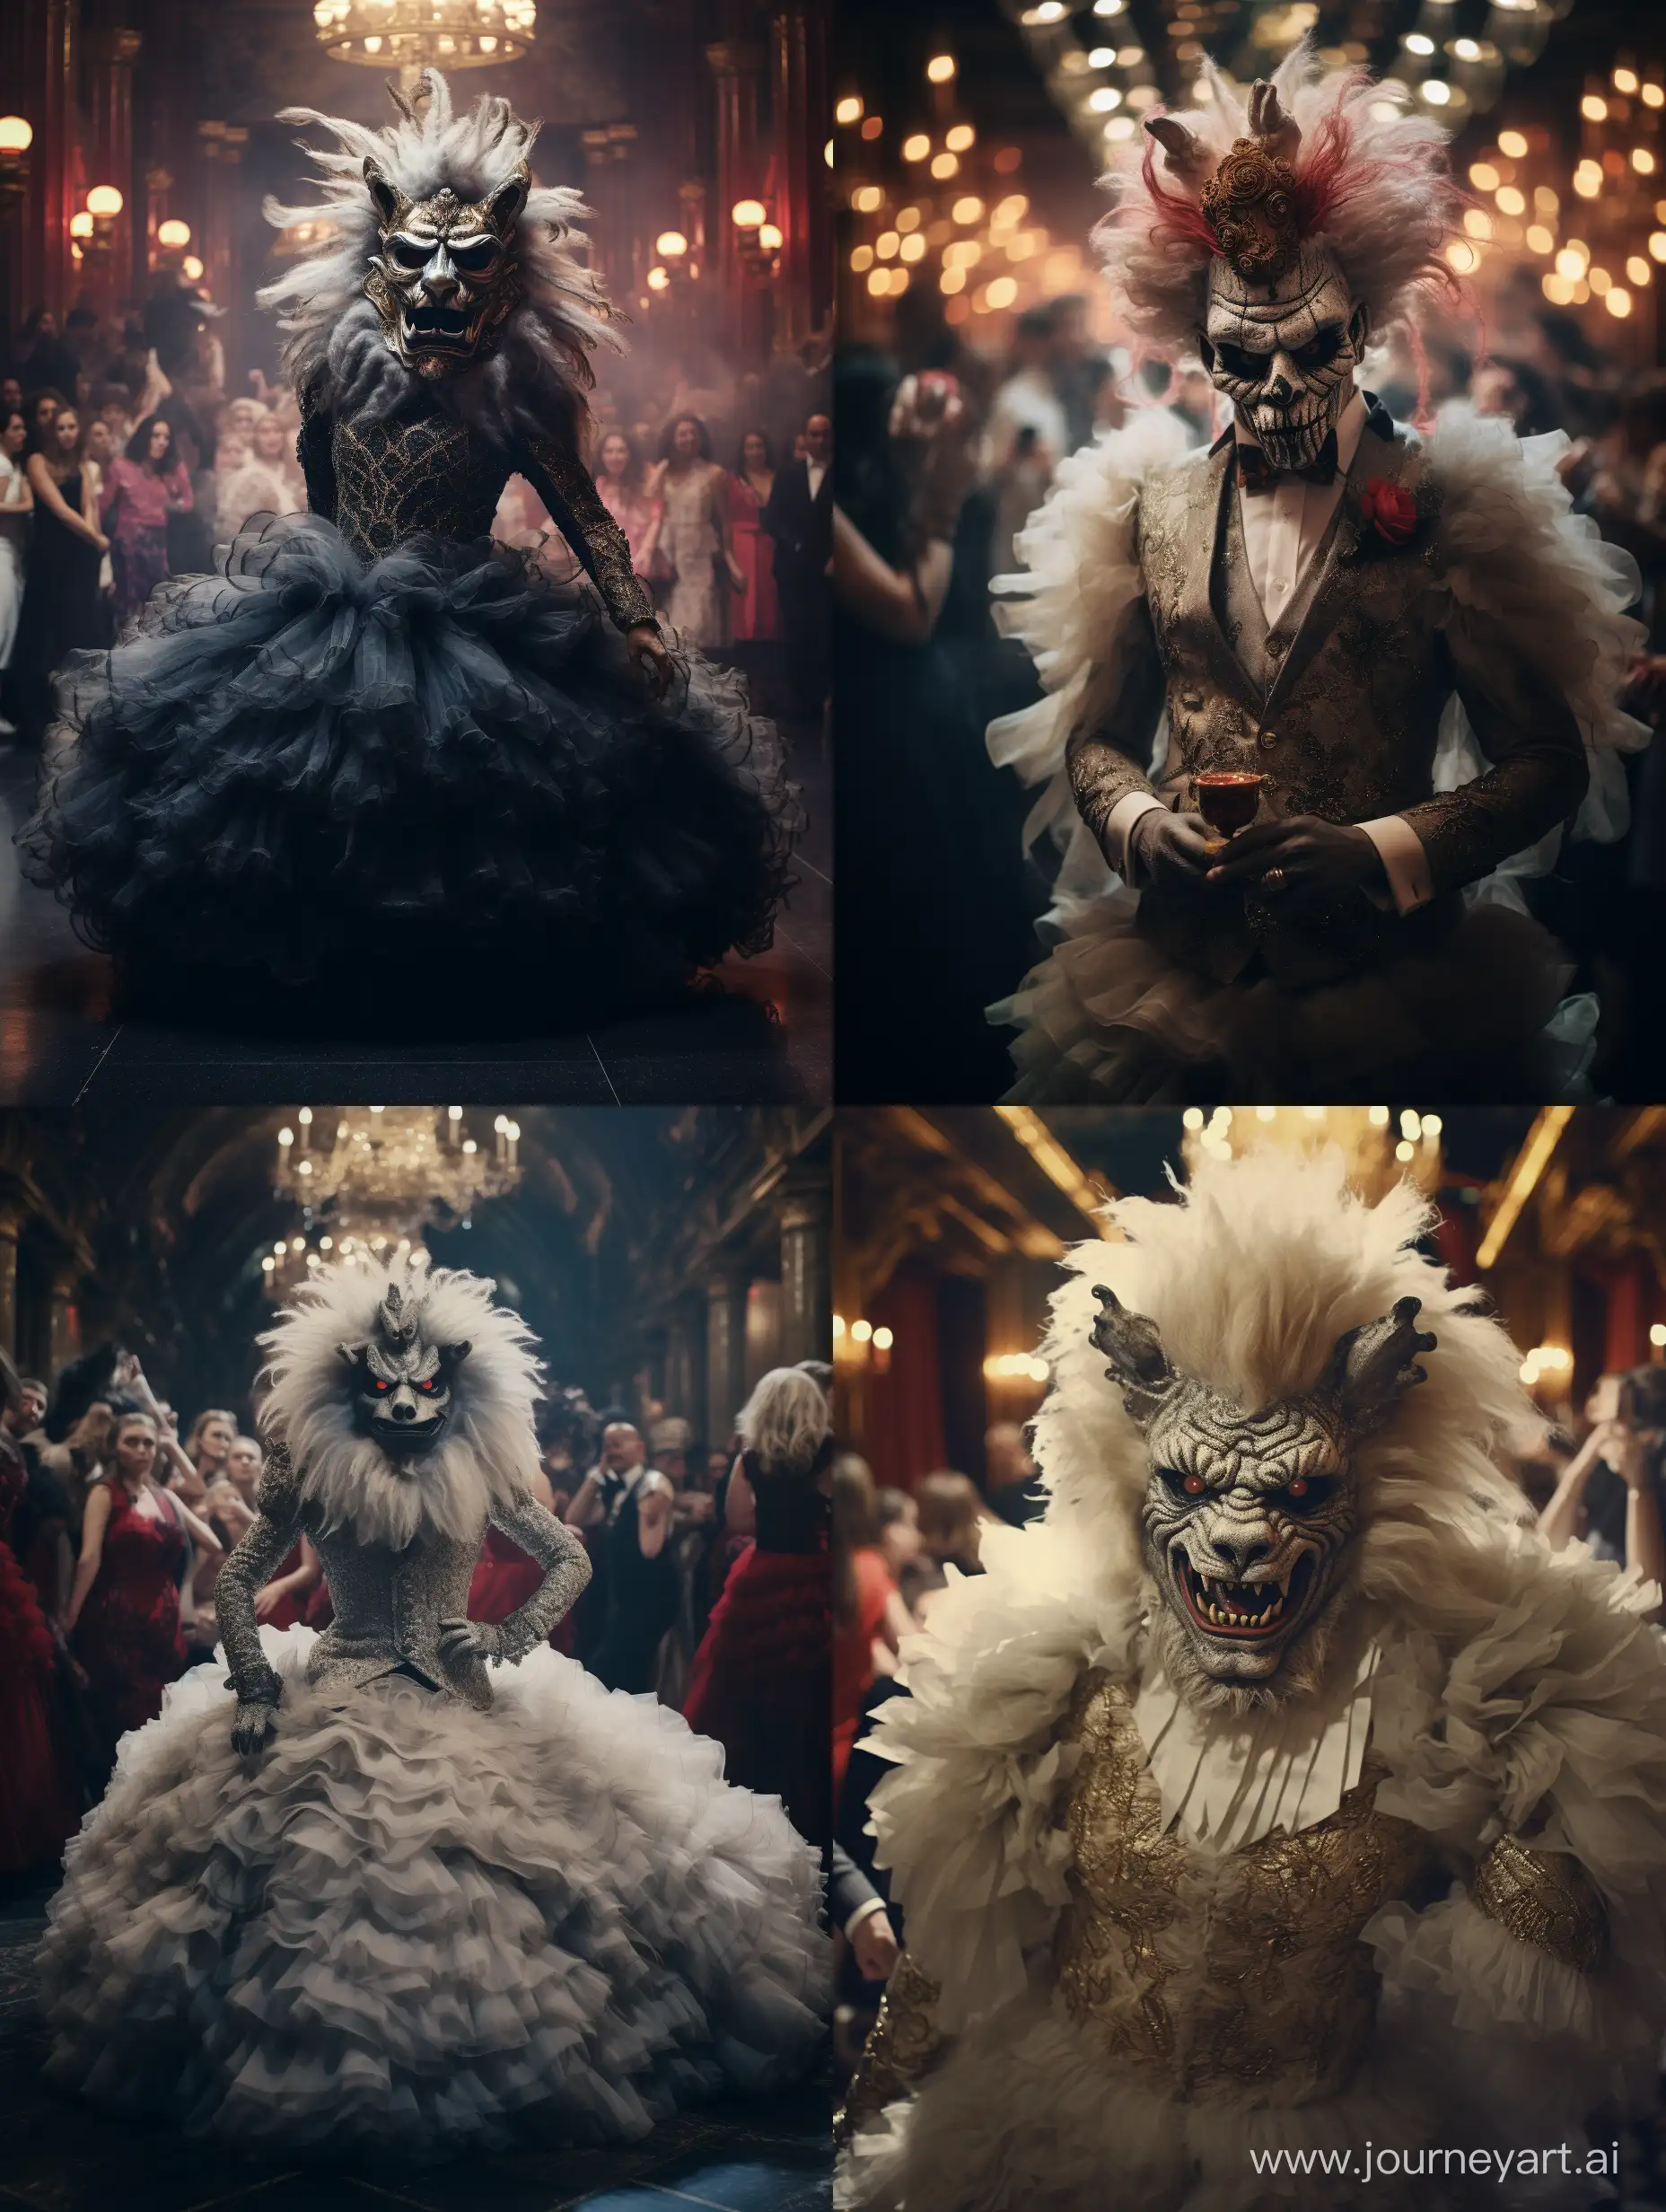 A formal monster ball for monsters only, Photojournalism, Shot on 70mm, Supplementary-Colors, 2.5D, 4k, Coloroid, Angelic, Powerful, Beautiful Lighting, Tone Mapping, Mythical humanoids, anthropomorphic, Elegant , Formal, Ballroom